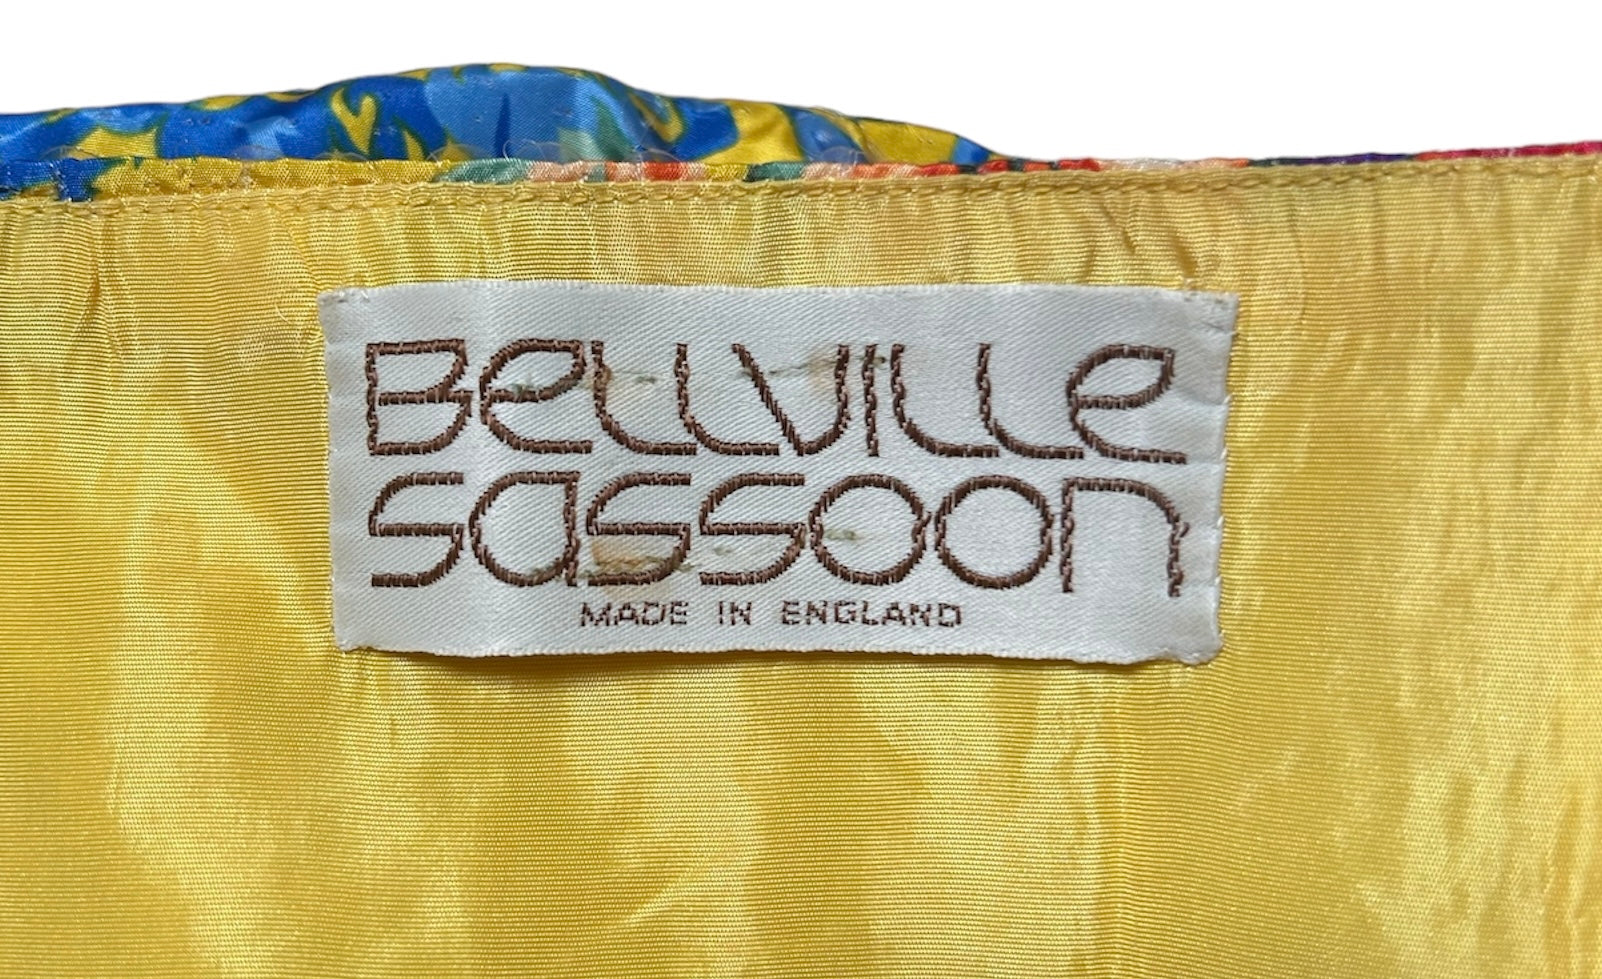  Bellville Sassoon Yellow Floral Silk & Sequined Cocktail Dress TAG PHOTO 5 OF 6